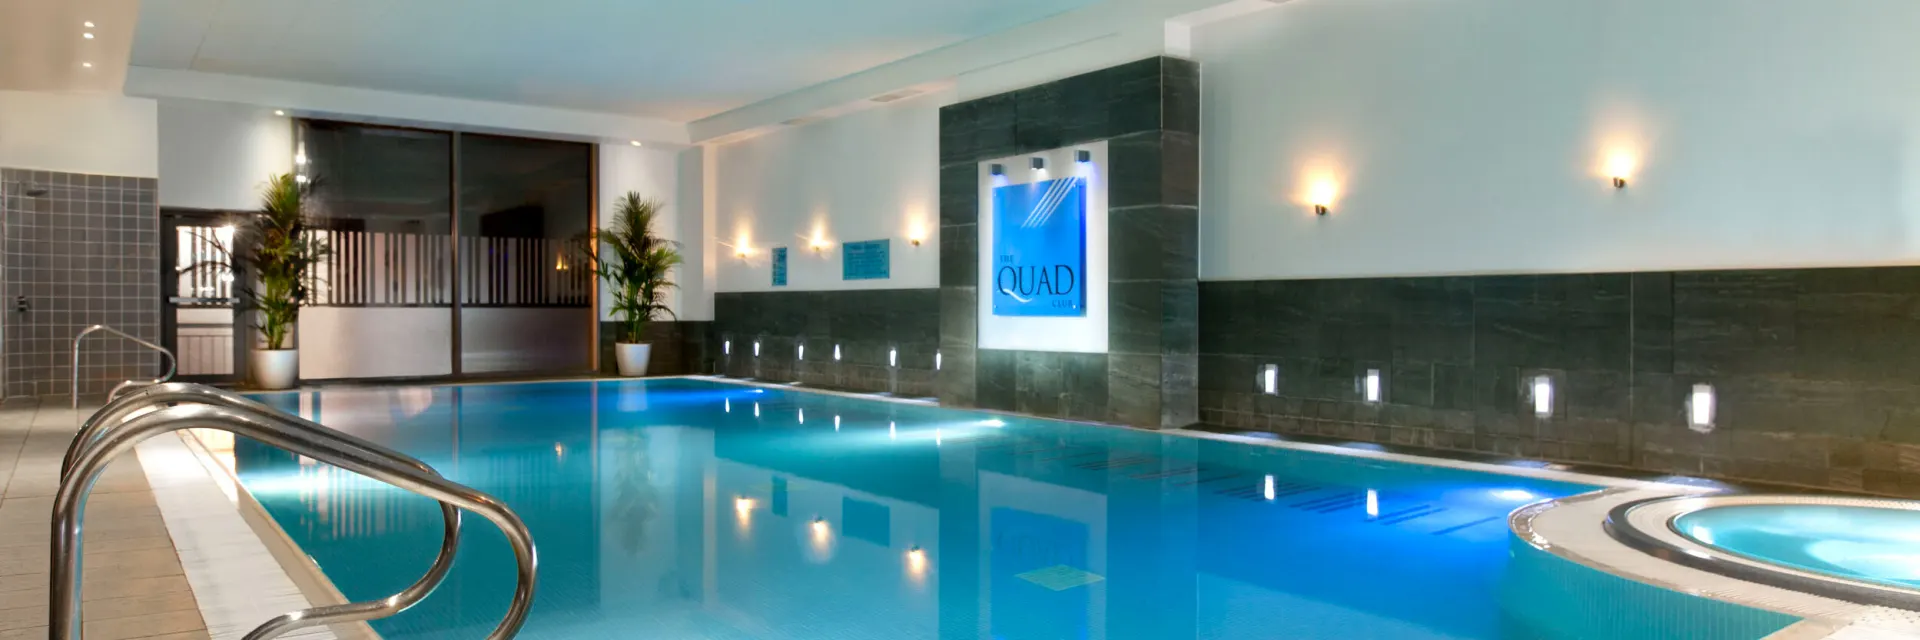 Quad Spa At The Crowne Plaza London Docklands